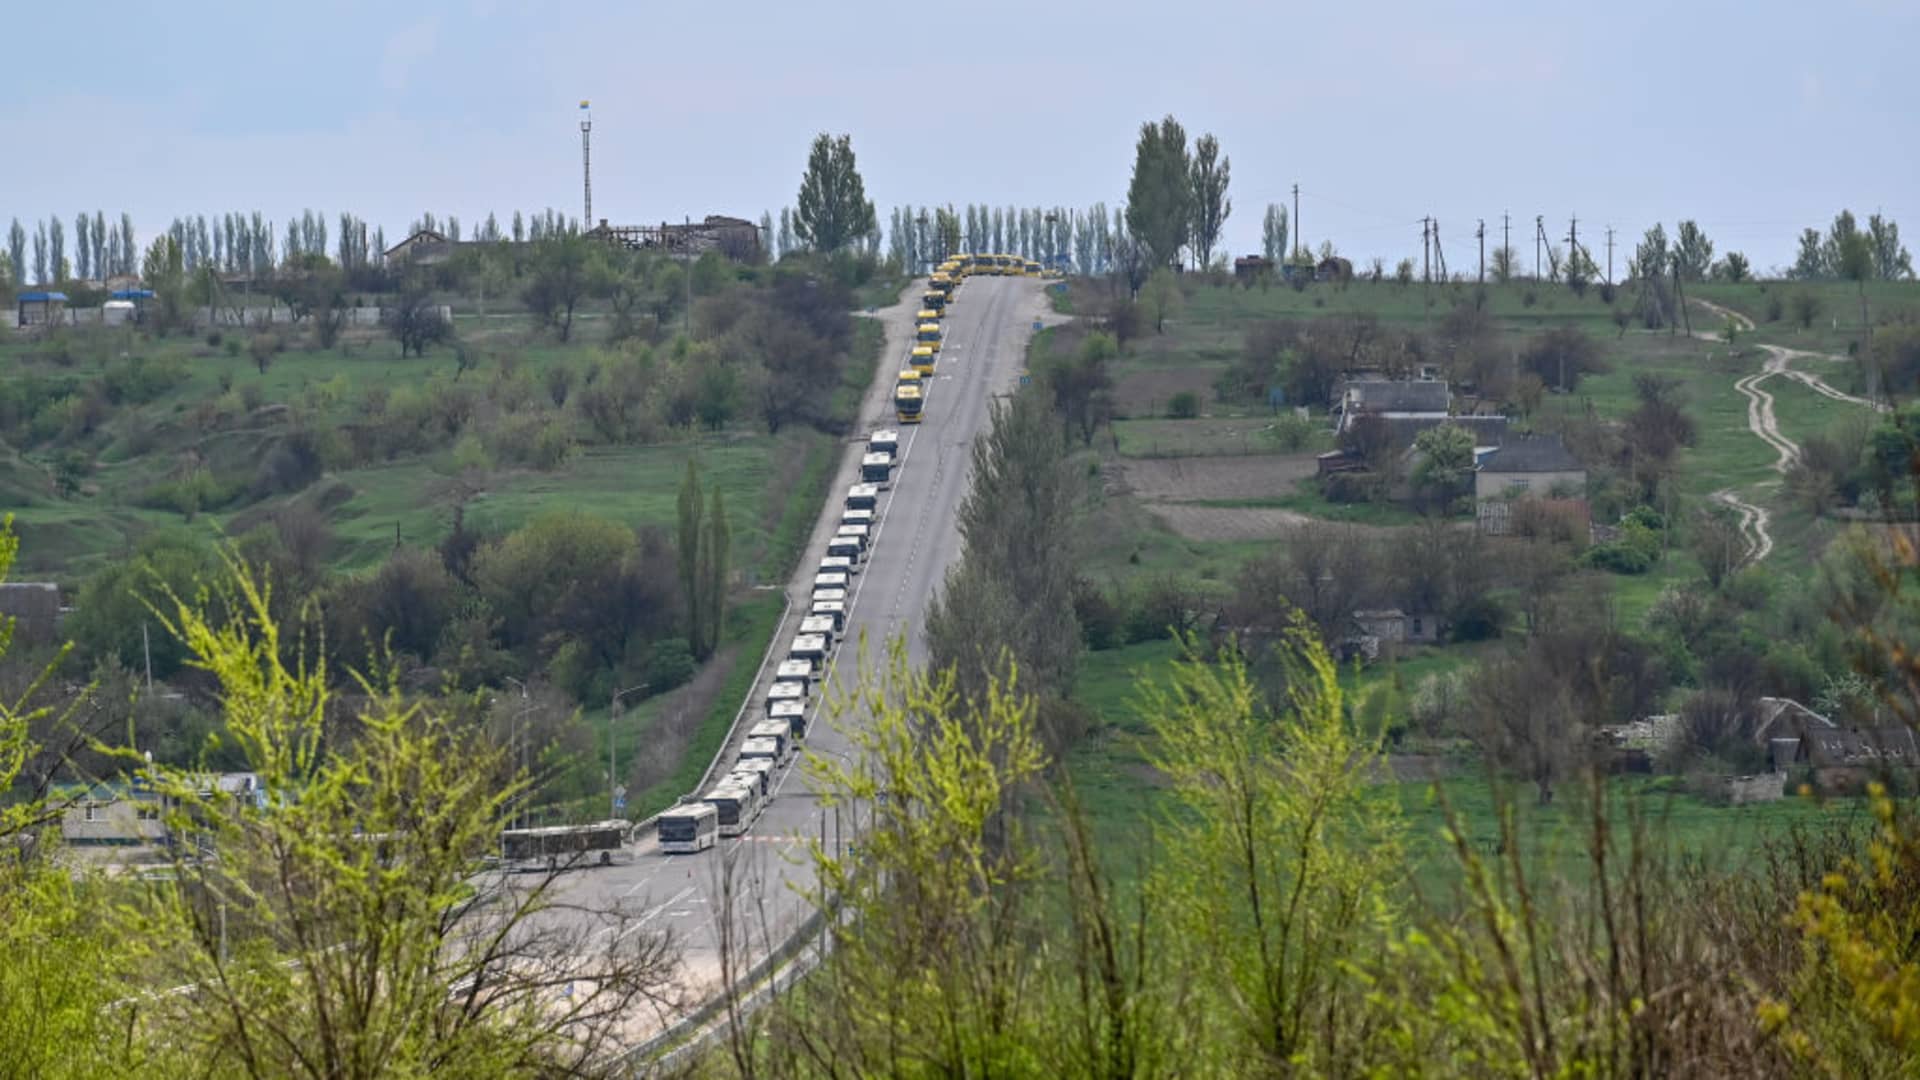 A convoy carrying people from Mariupol arrives in Kamianske, Zaporizhzhia, Ukraine on May 3, 2022 as Russian attacks continue.